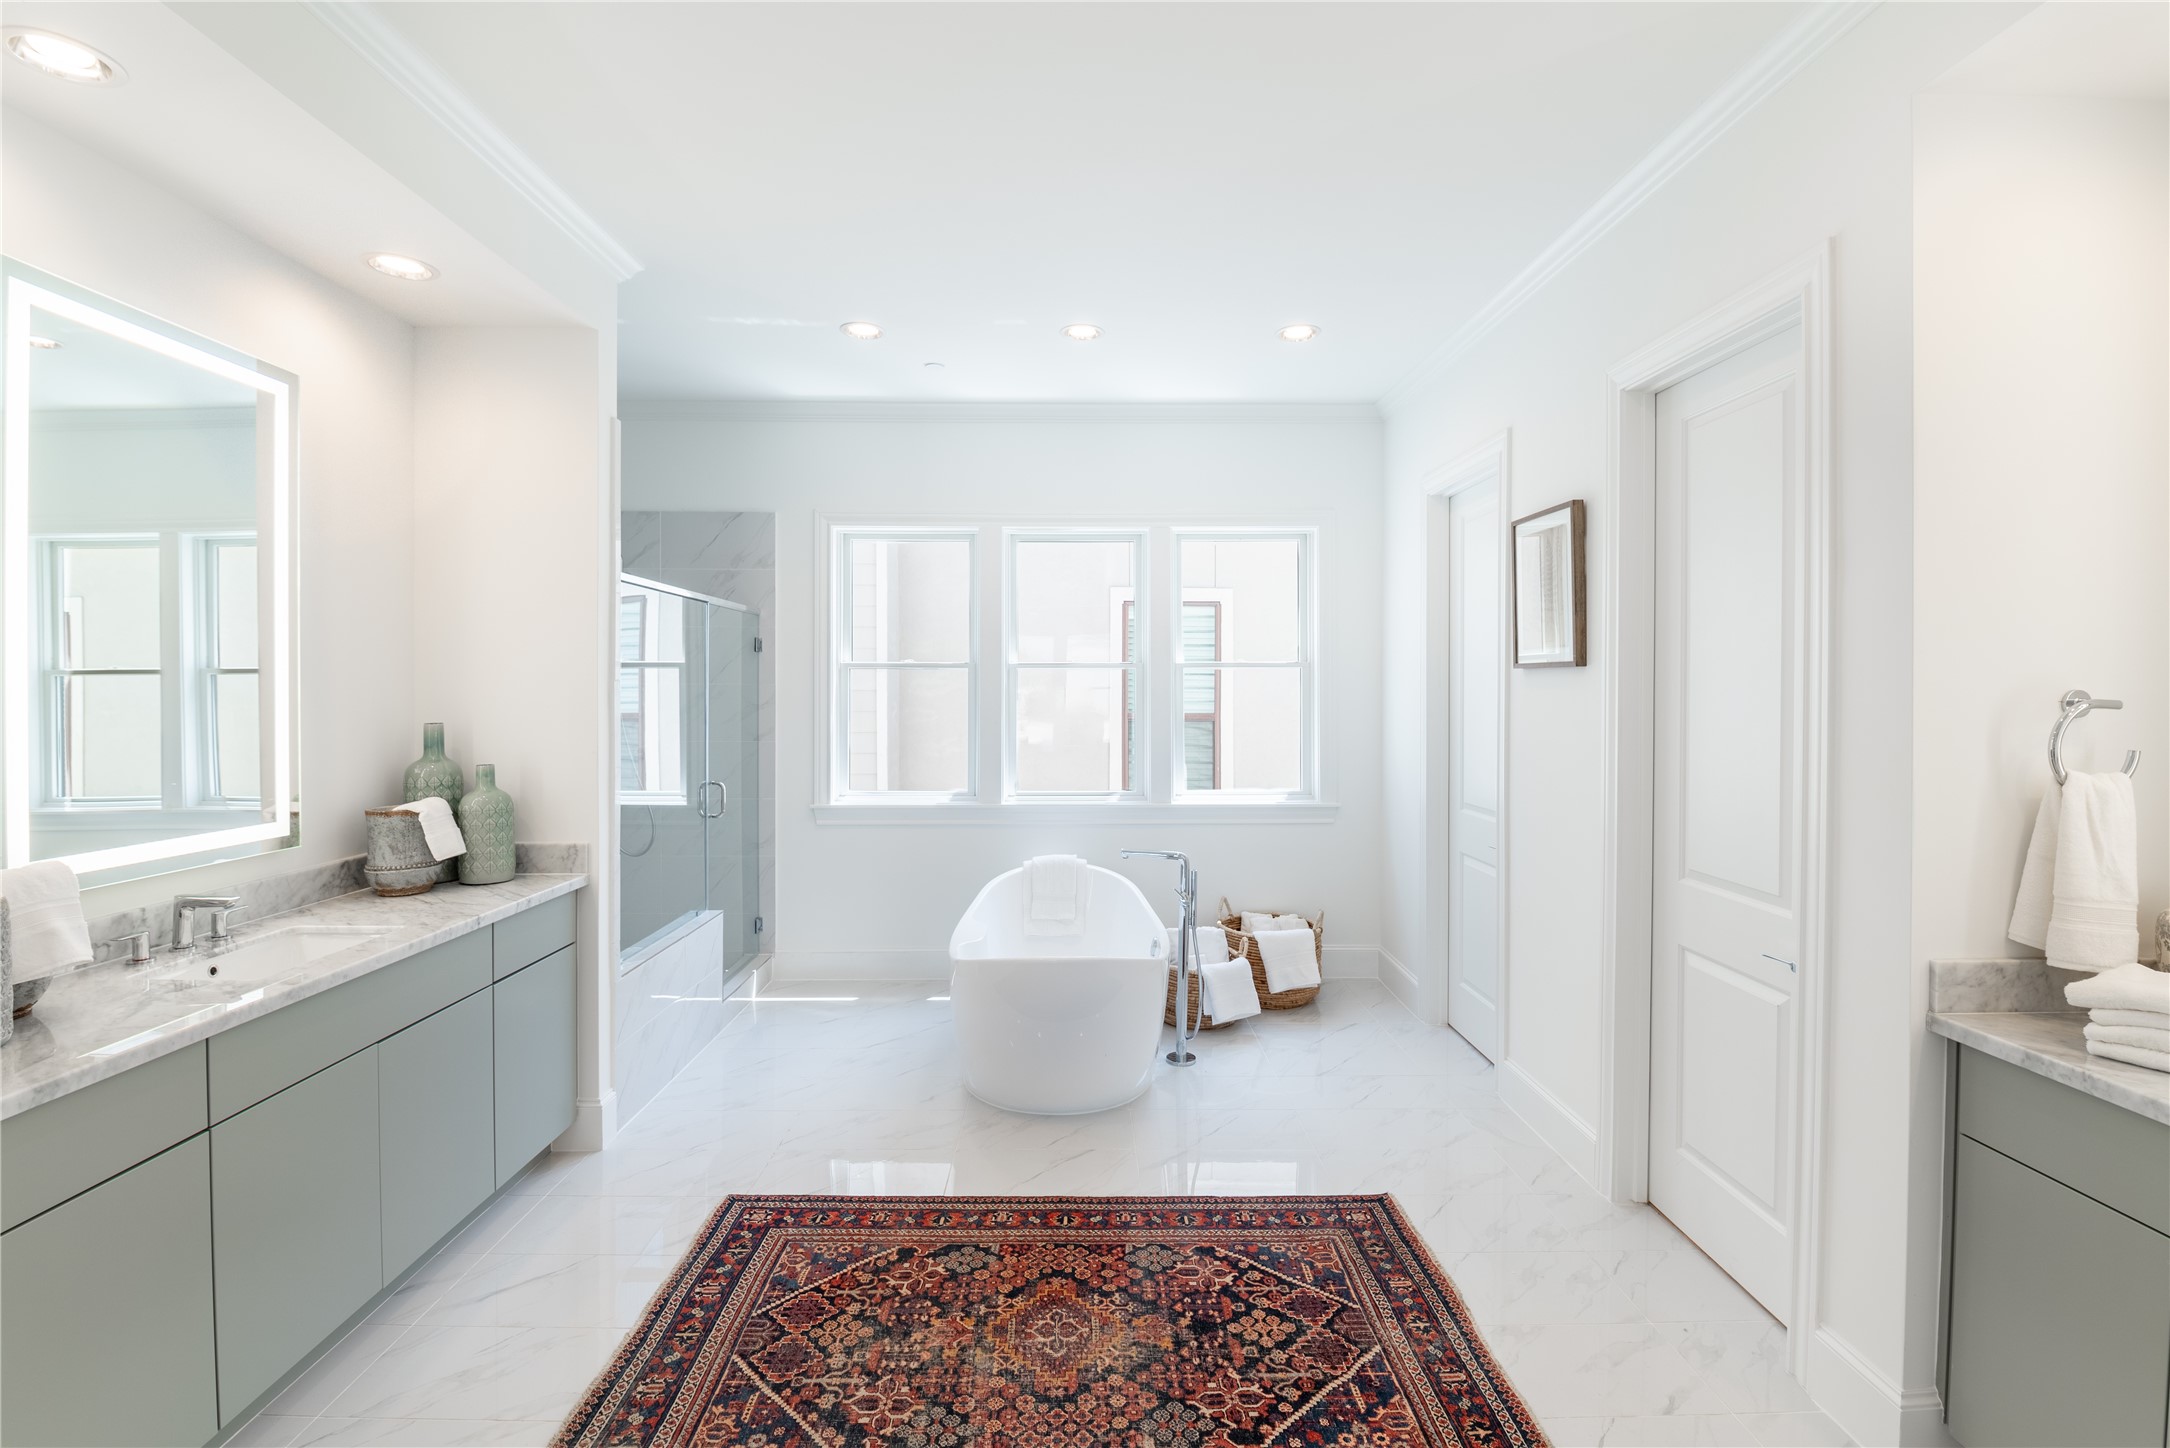 Clean finishes, a luxurious freestanding soaking tub and an oversized shower with bench are sure to soothe your soul.
